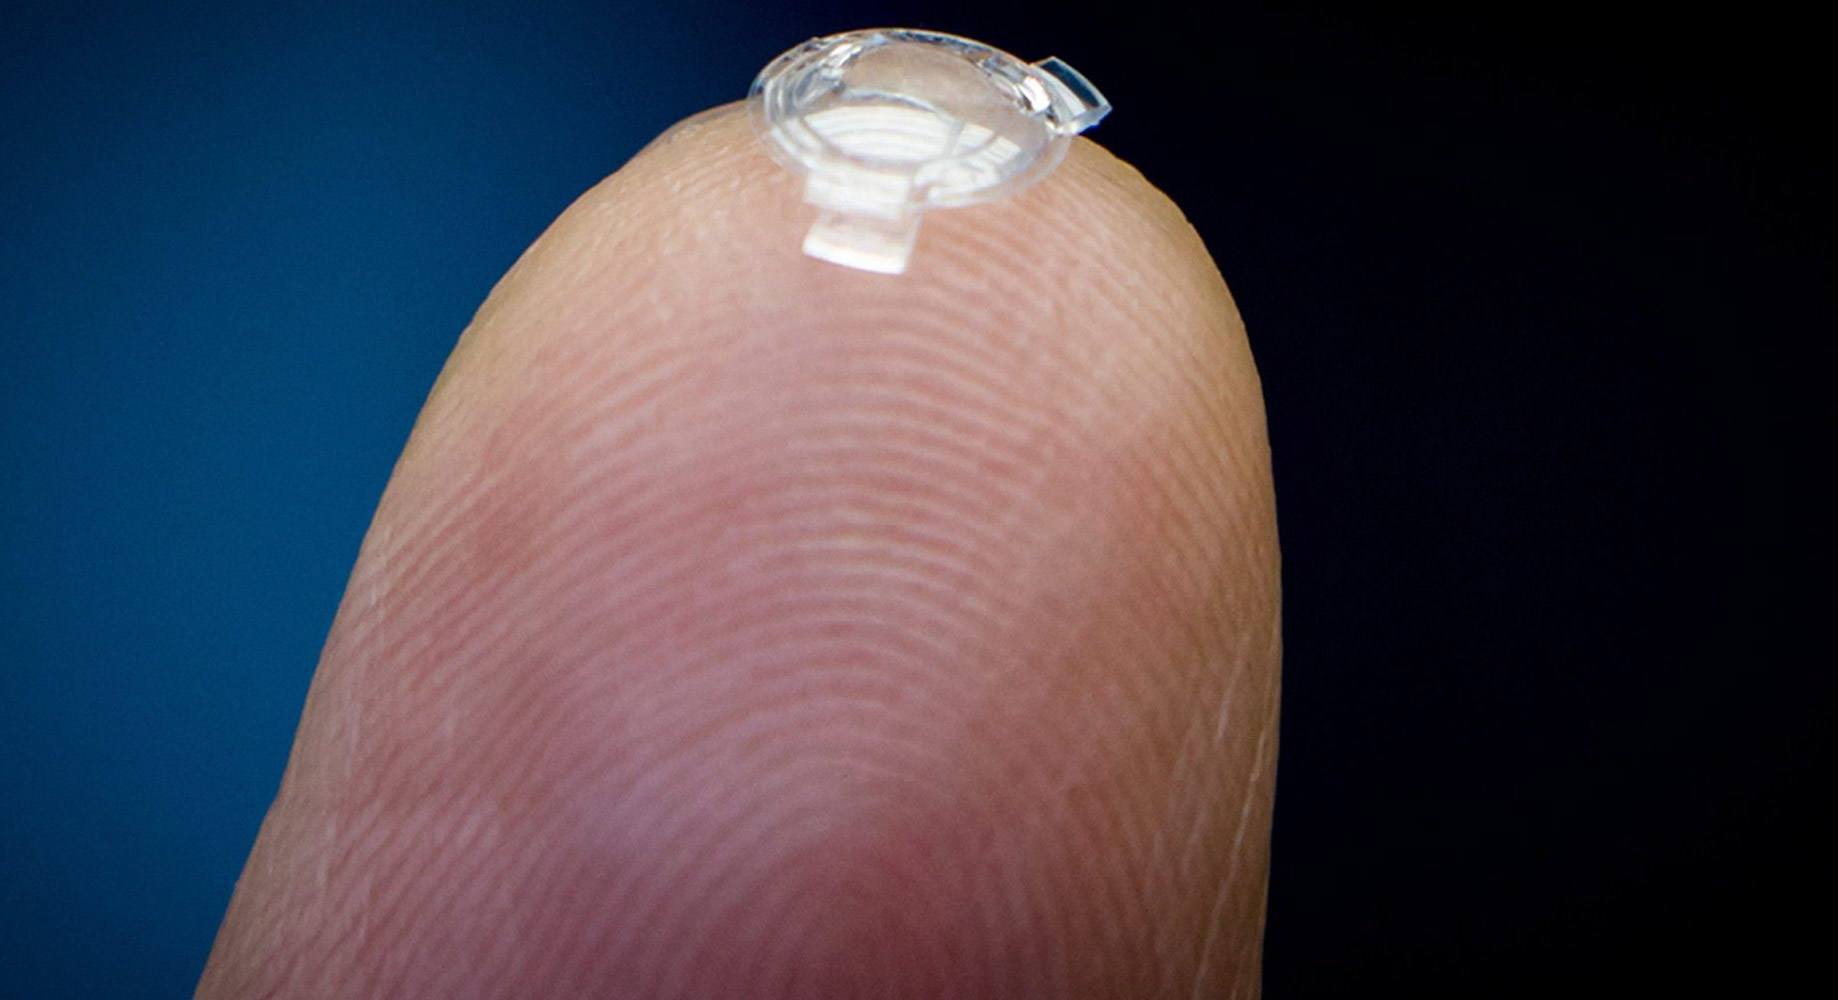 That Bionic Lens Promises Perfect Vision for Life